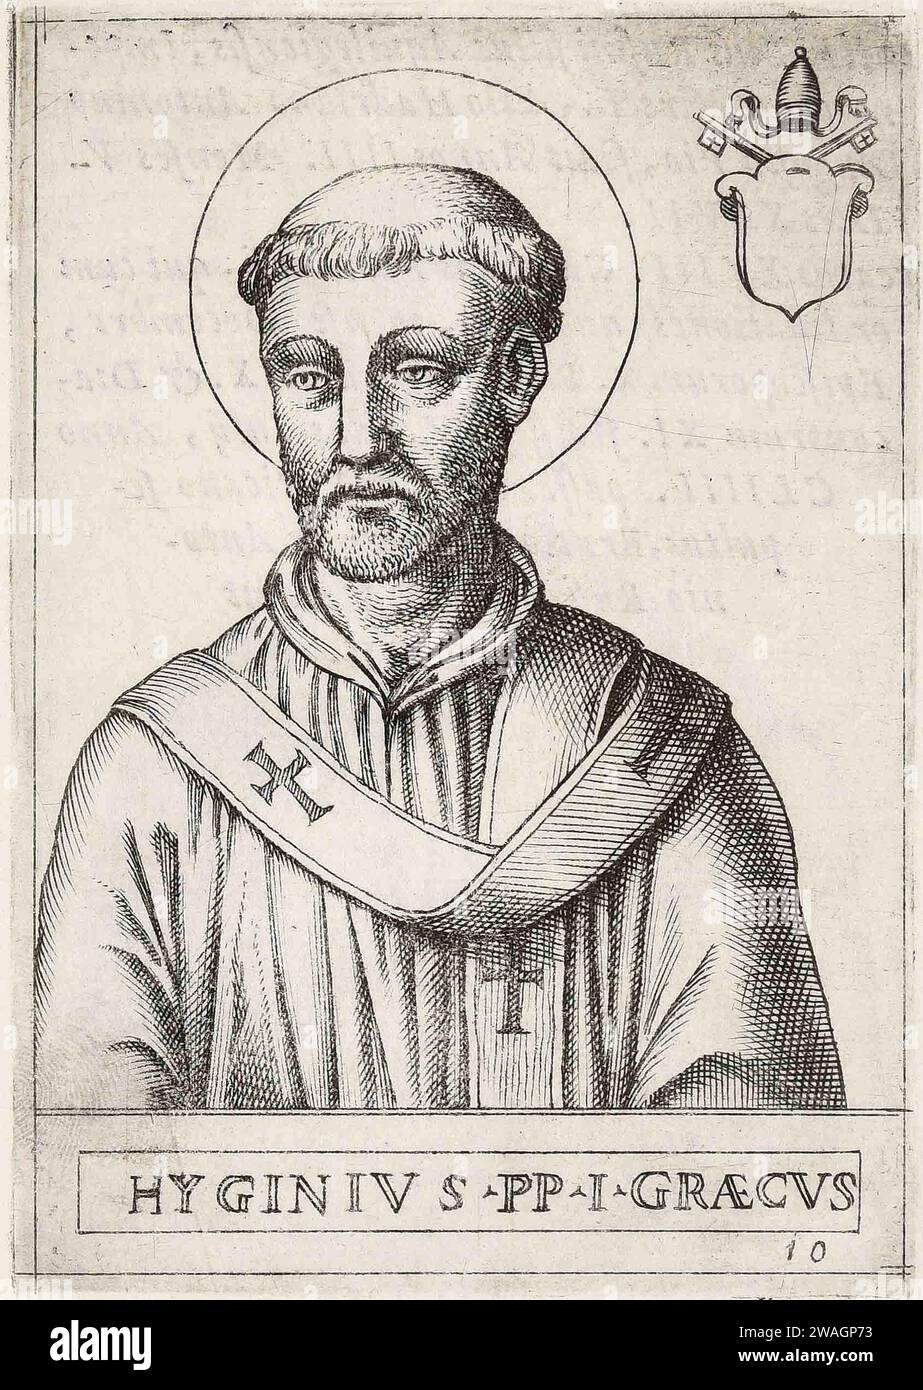 A 1580 engraving of Pope Hyginus, who was pontiff from AD136 to AD140. He was the ninth pope. He was Greek and it was he that introduced the idea of godparents to help baptised children during their Christian life and duties. Stock Photo